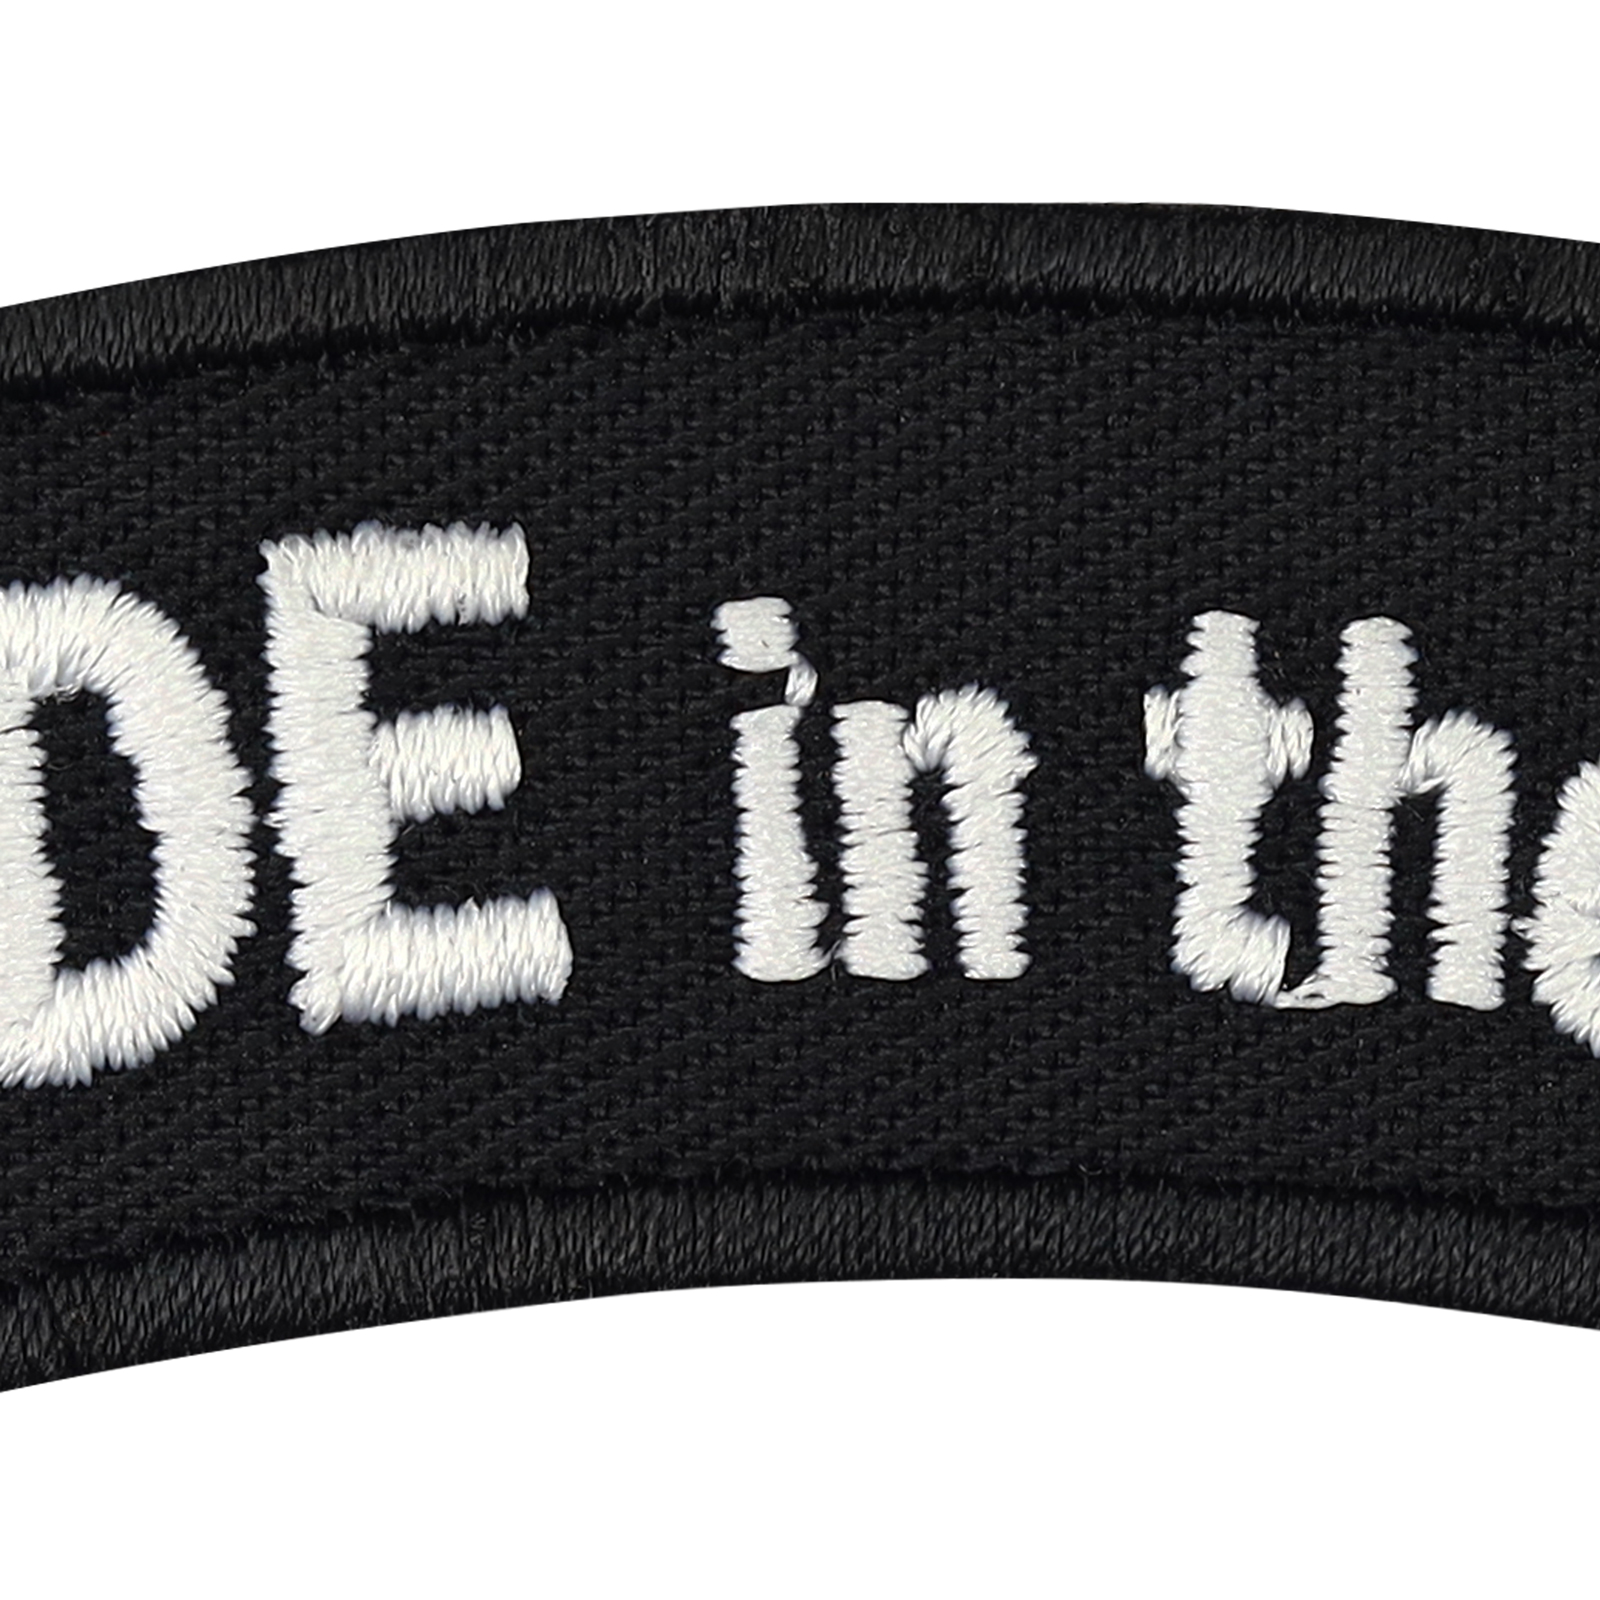 Made in the 60s - Patch